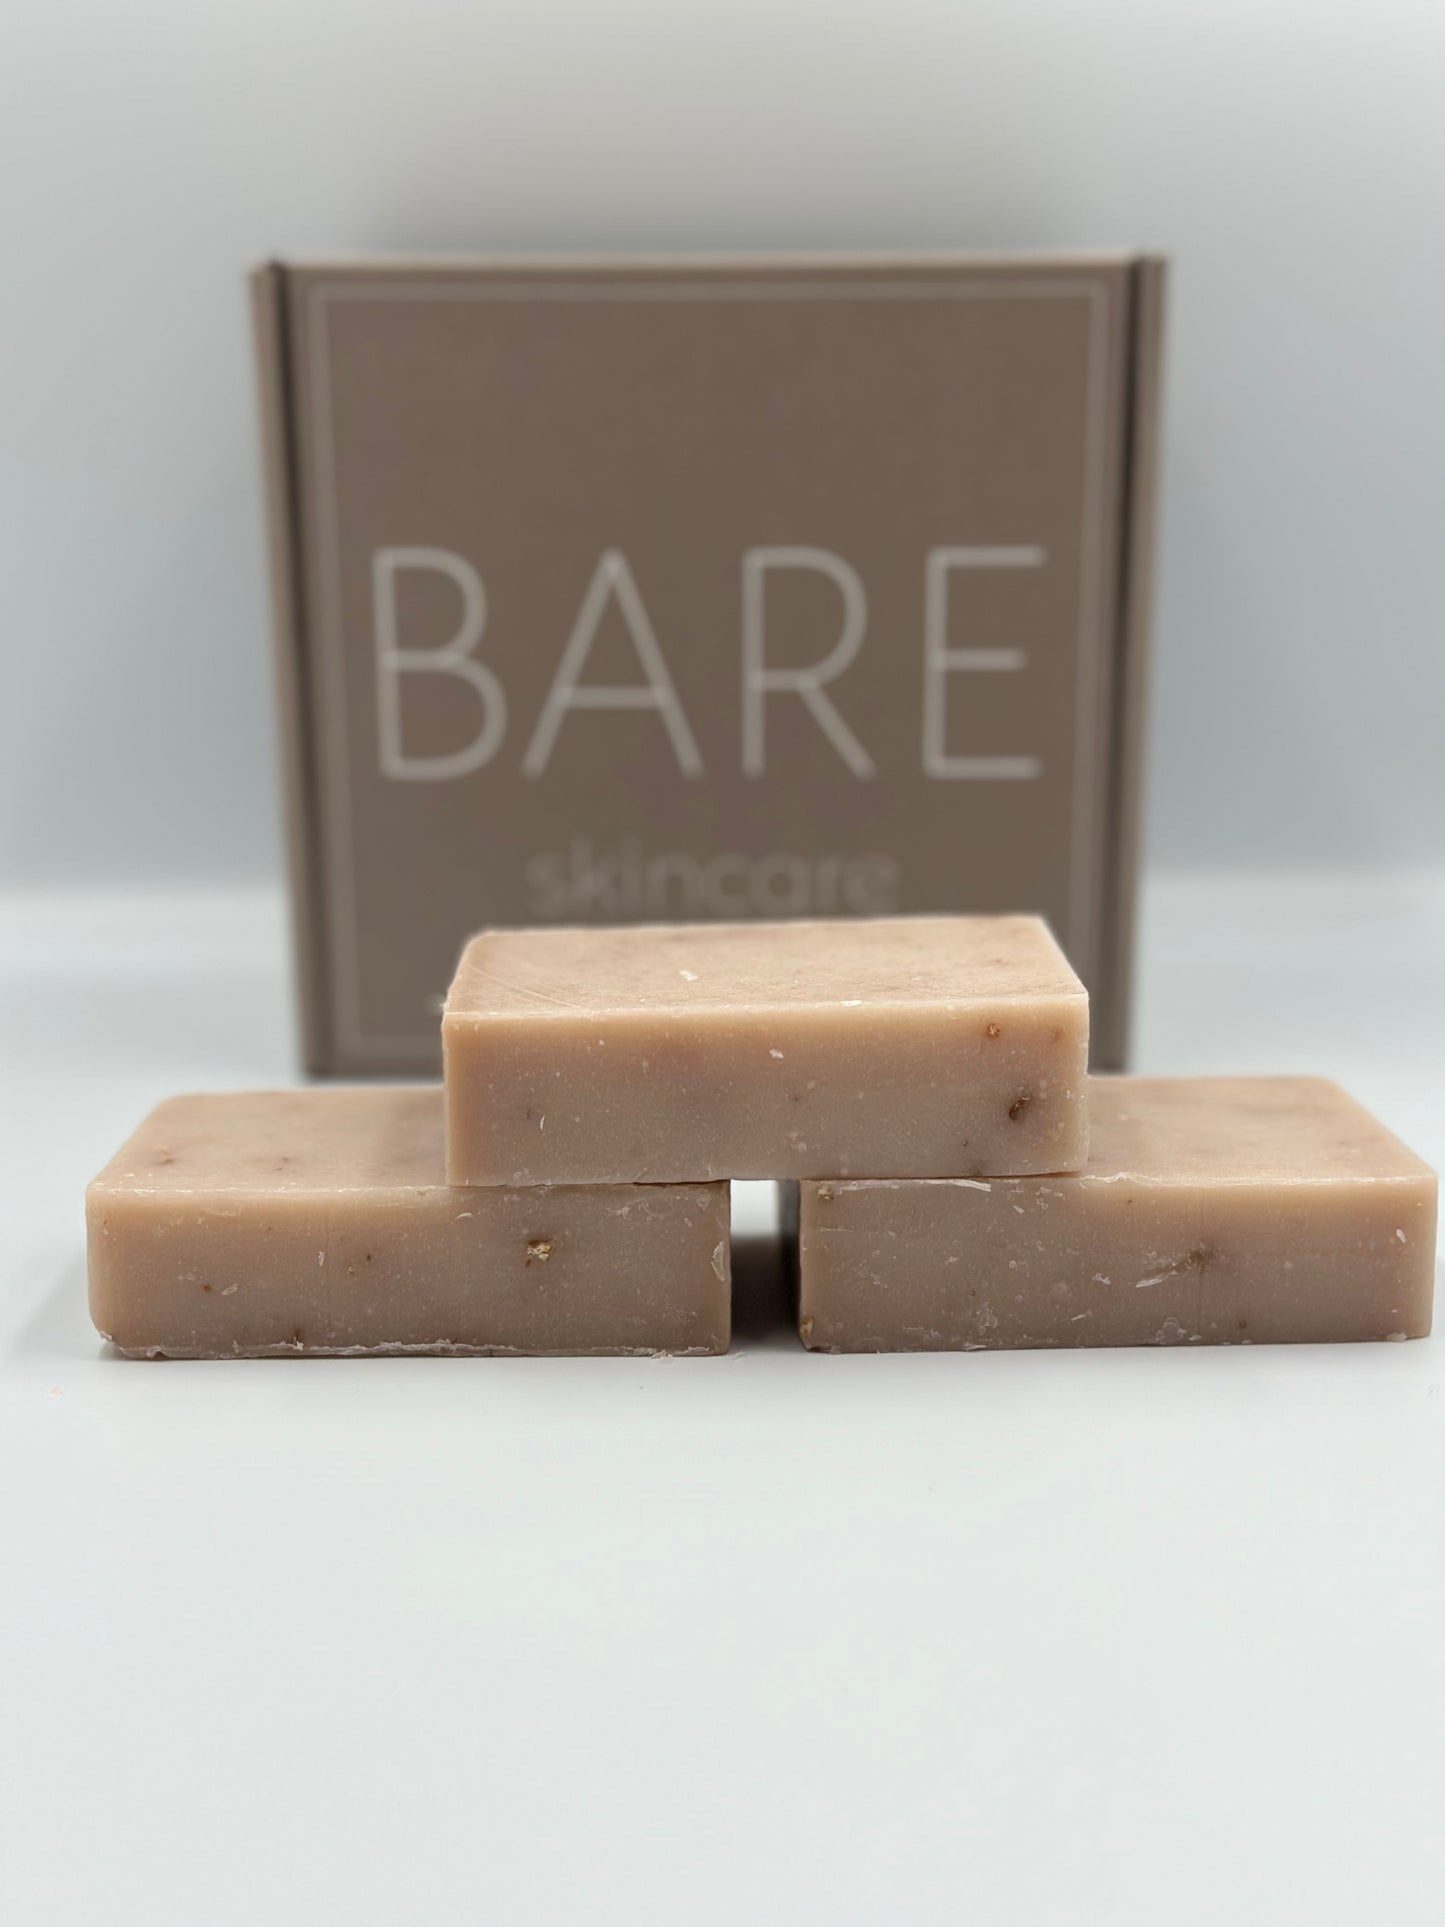 Bare Relief Bar